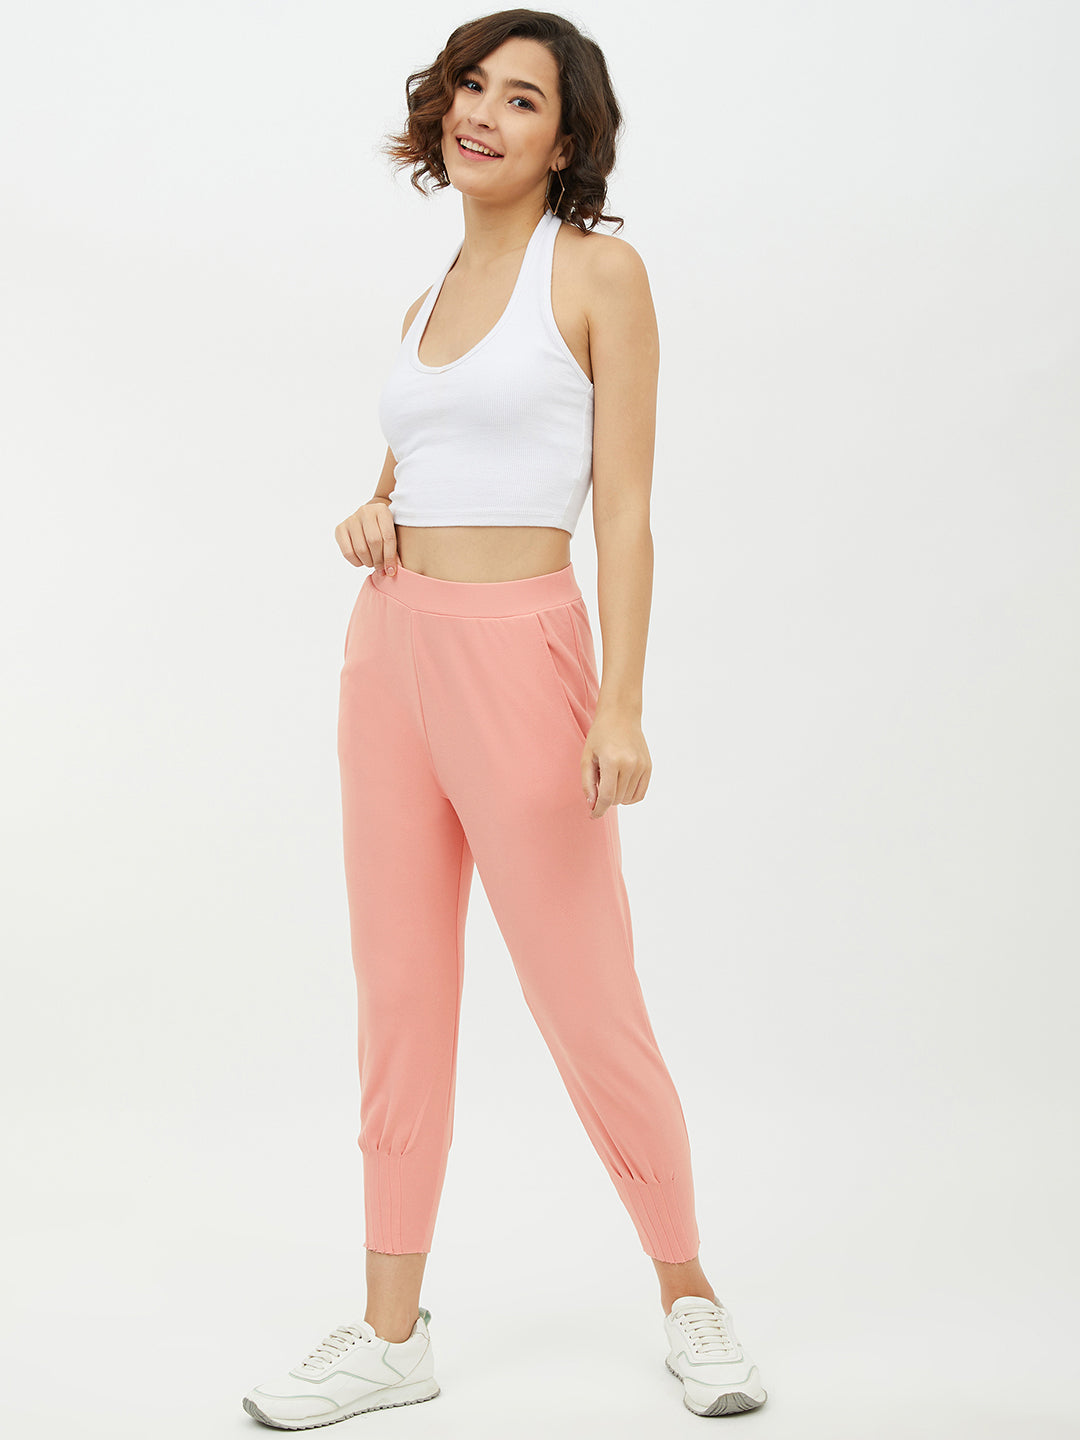 Women's Pink Jogger Style Trousers